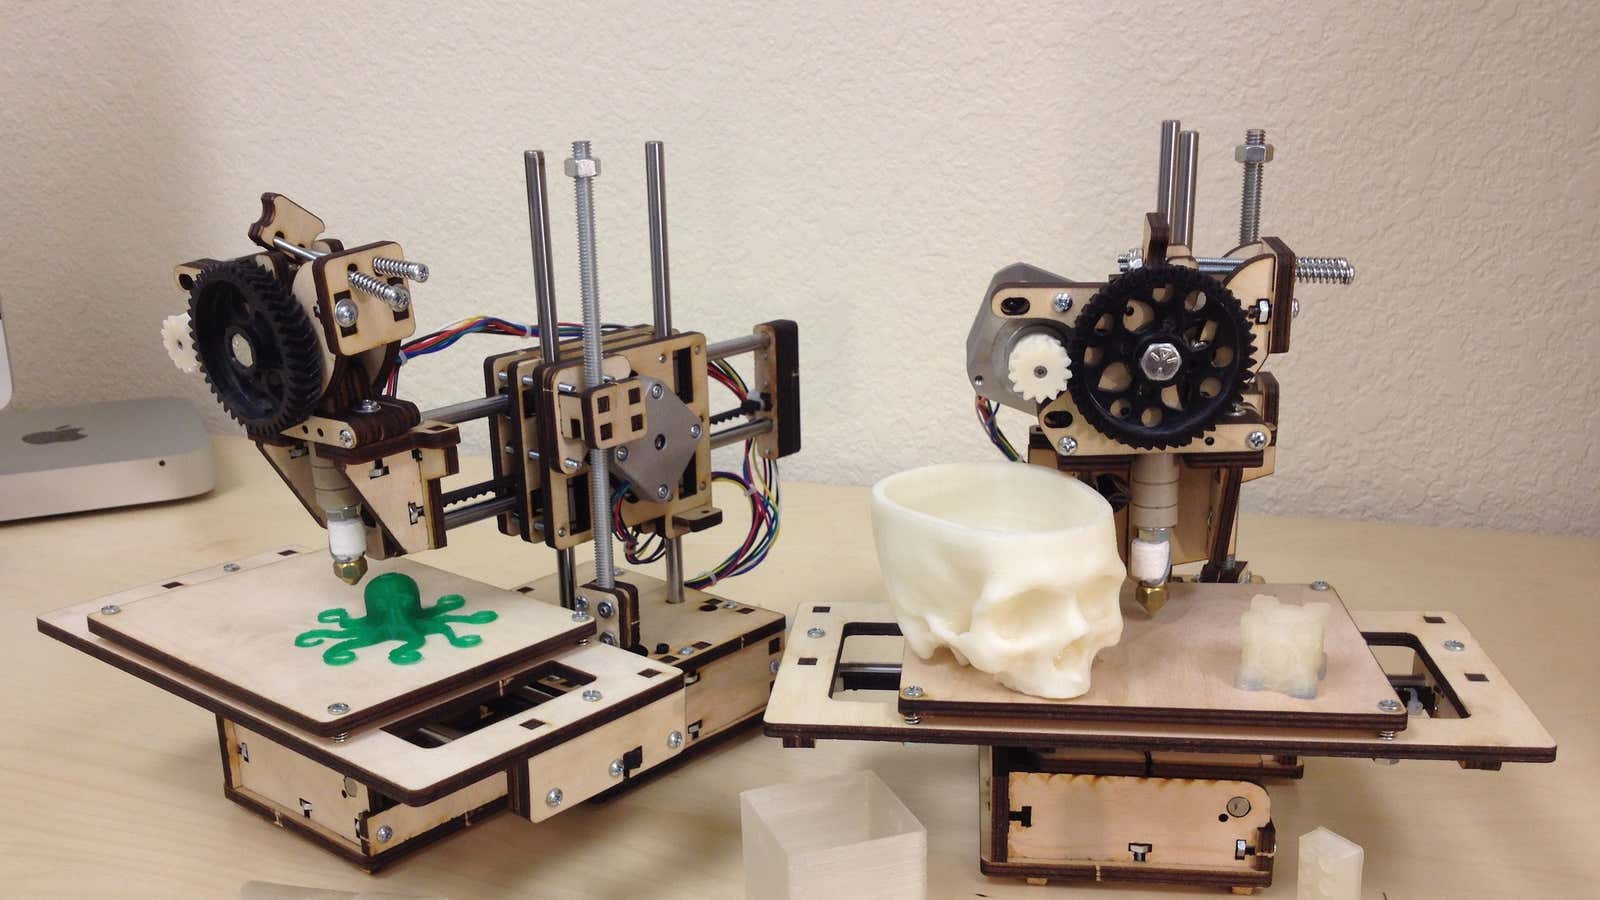 Printrbot jr is as basic as they get—until now.